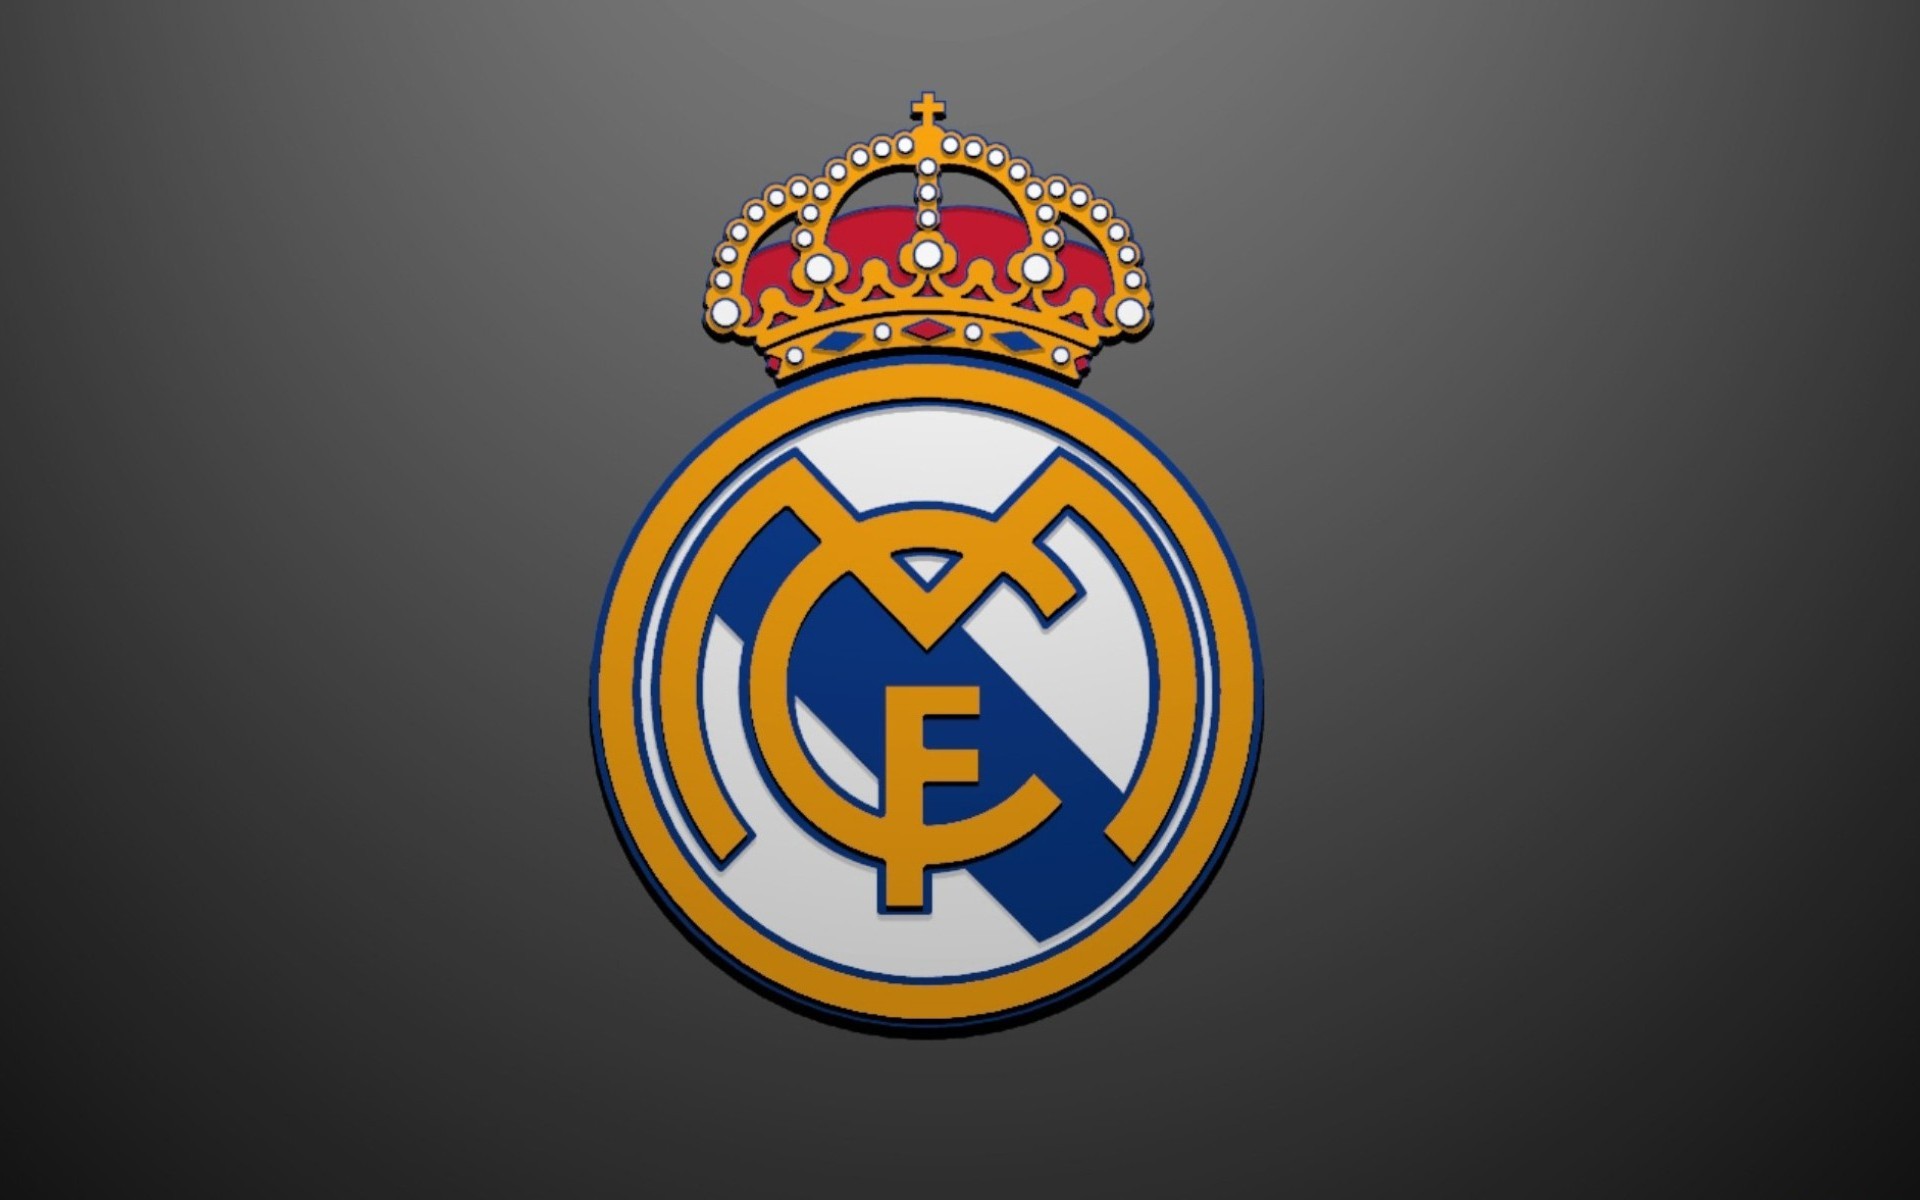 General 1920x1200 Real Madrid logo simple background soccer clubs gray background soccer sport